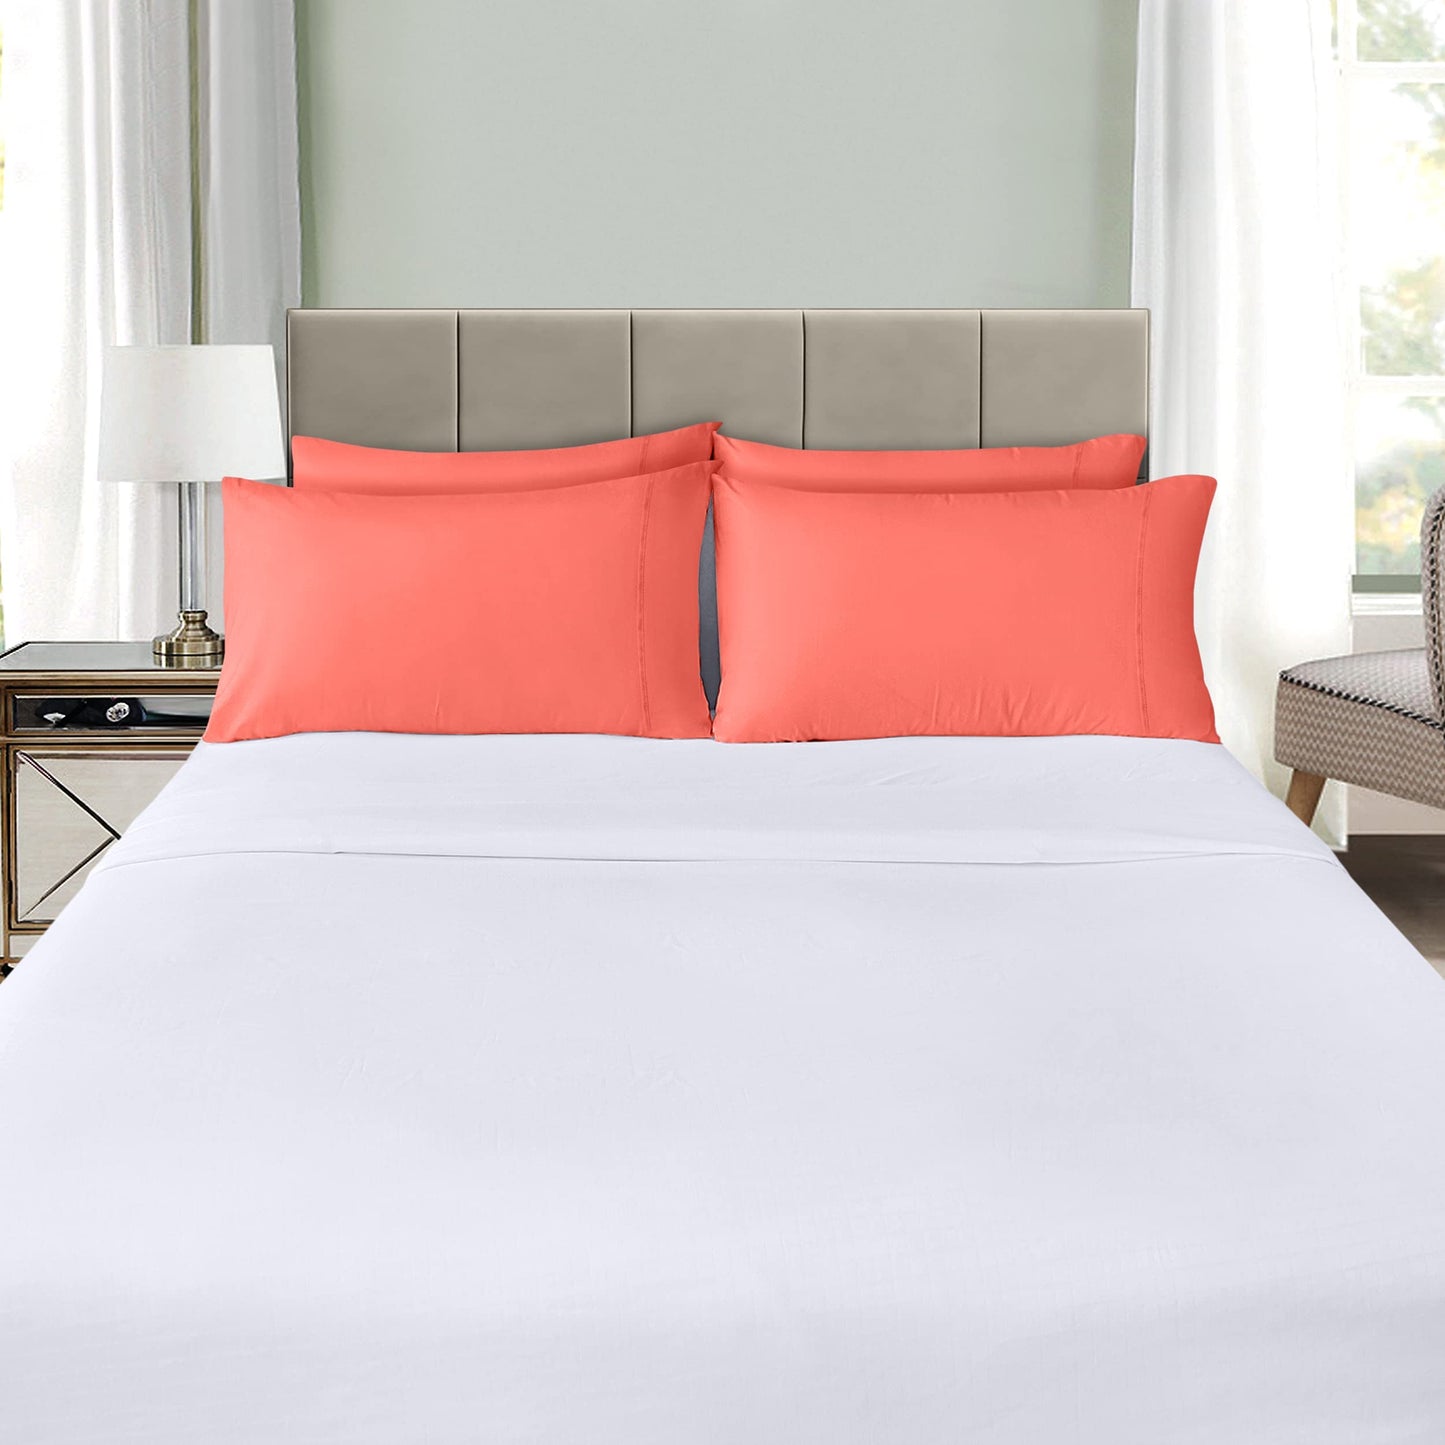 Utopia Bedding Queen Pillow Cases - 4 Pack - Envelope Closure - Soft Brushed Microfiber Fabric - Shrinkage and Fade Resistant Pillow Cases Queen Size 20 X 30 Inches (Queen, Coral)